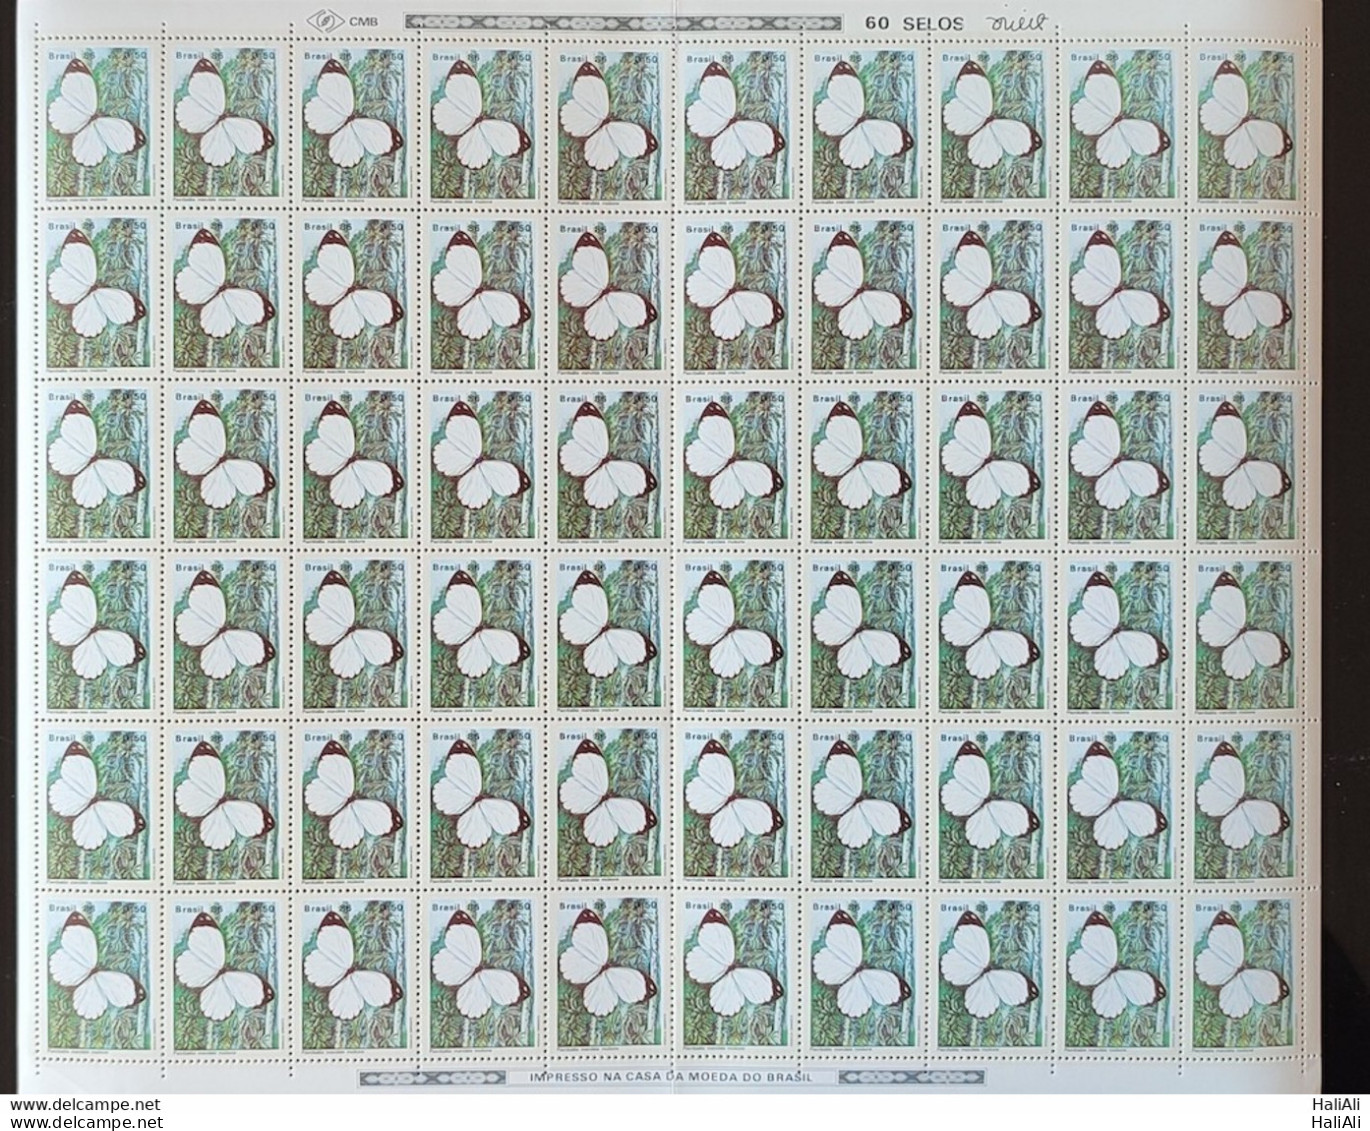 C 1513 Brazil Stamp Butterfly Insects 1986 Sheet.jpg - Nuevos